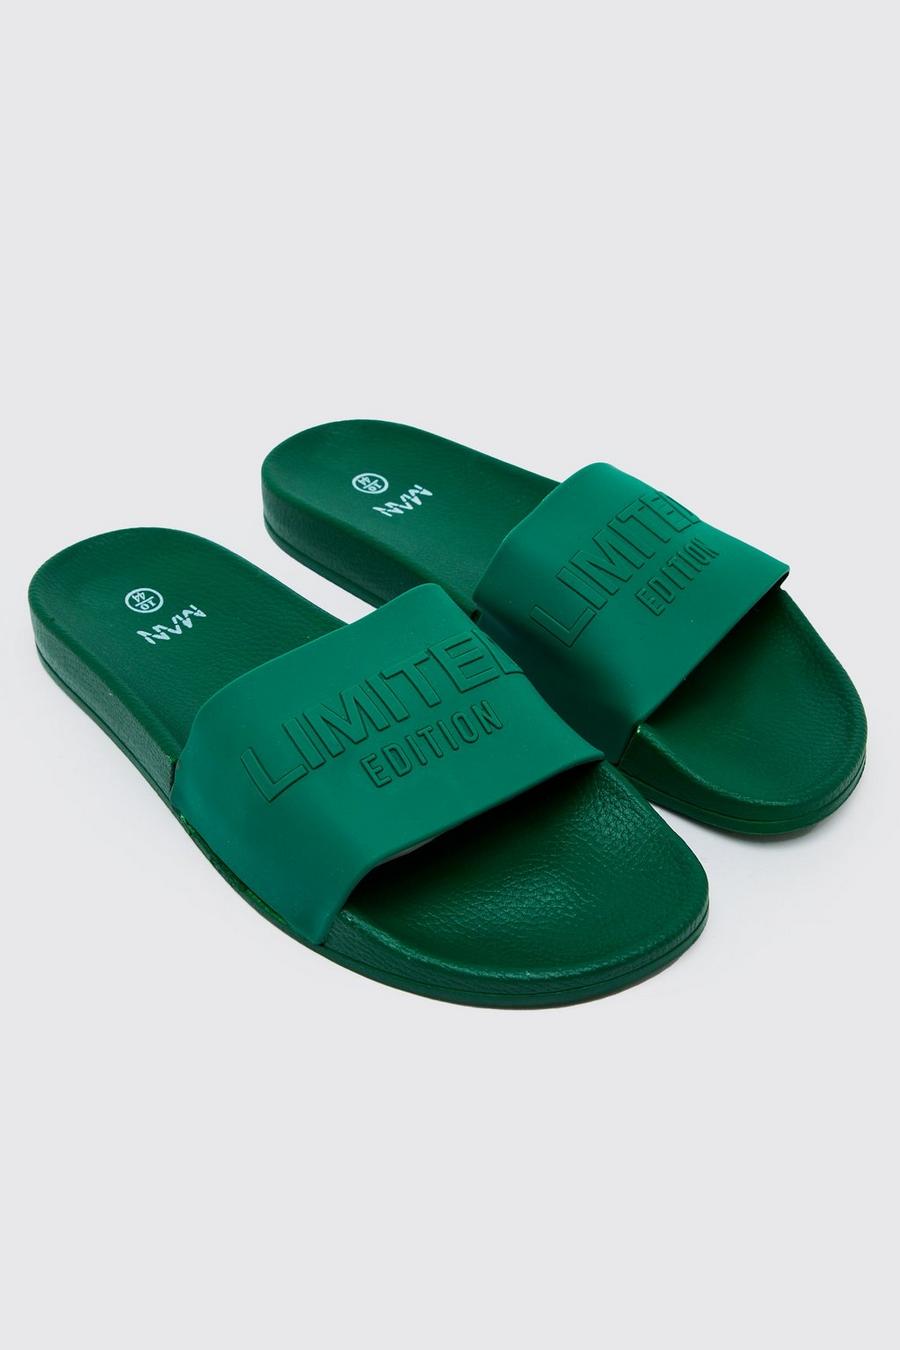 Sandalias Limited con relieve, Green